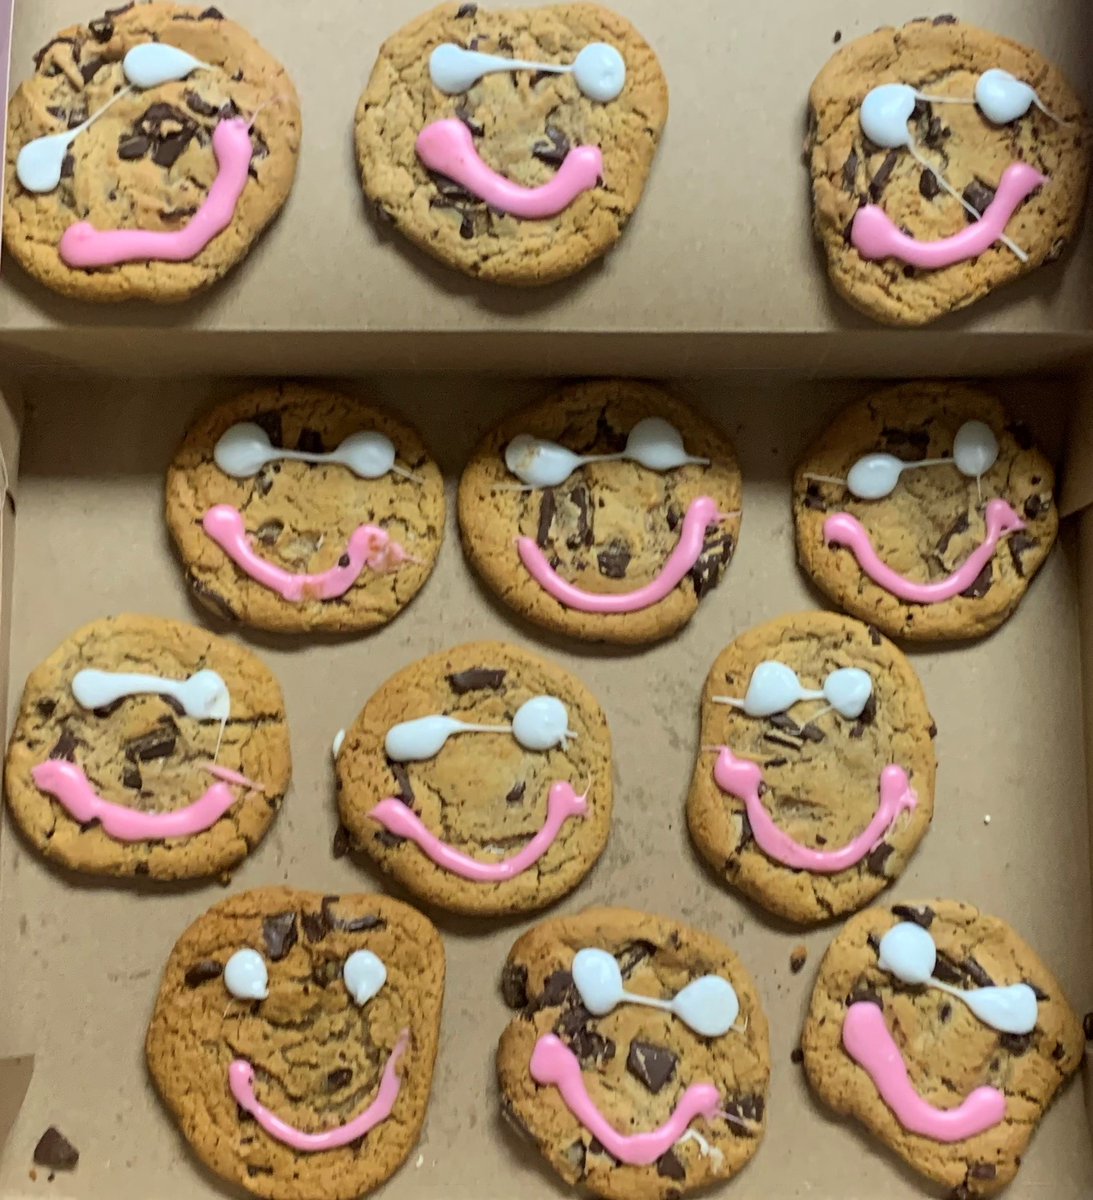 The Price Steel team had some smile cookies for a lunch time snack to support the stollery children's hospital.
#SmileWeek #SmileCookie #childrenshospital #stollery #stolleryhospital